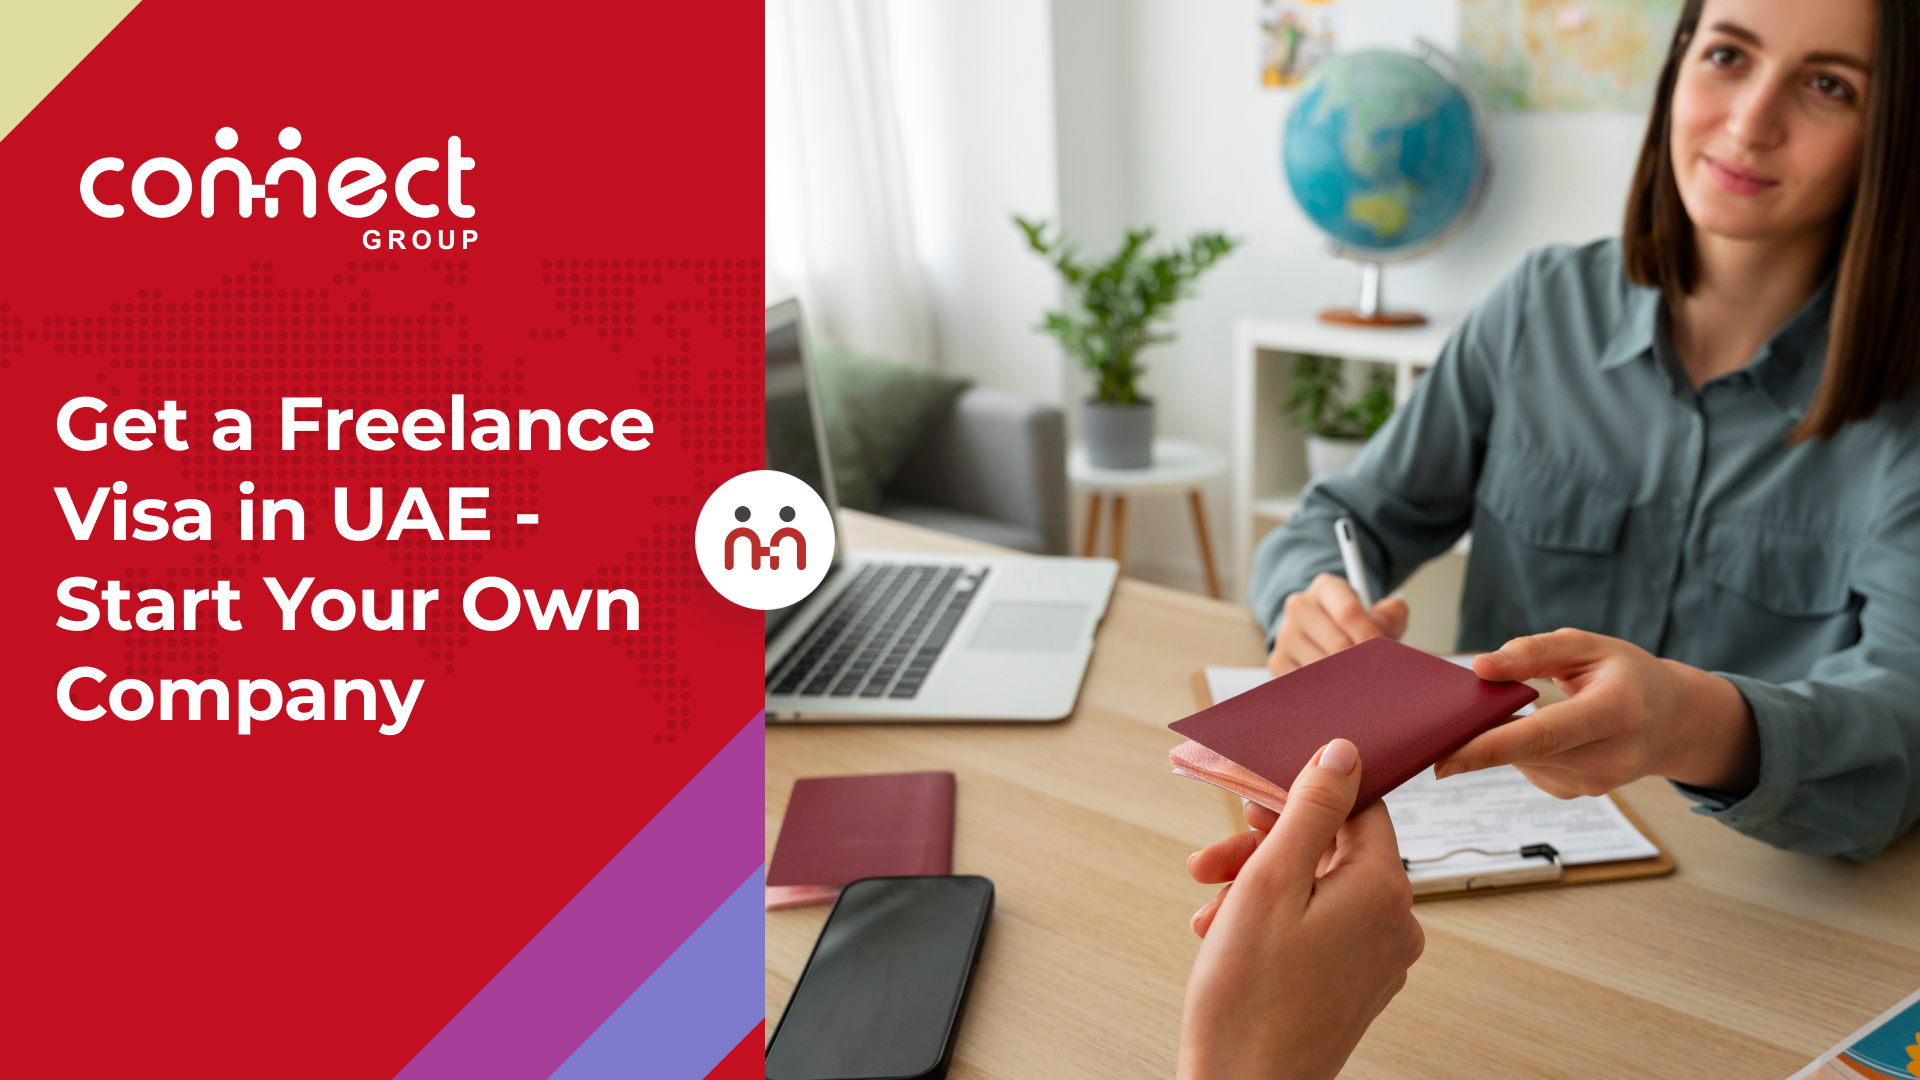 Get a Freelance Visa in UAE - Start Your Own Company